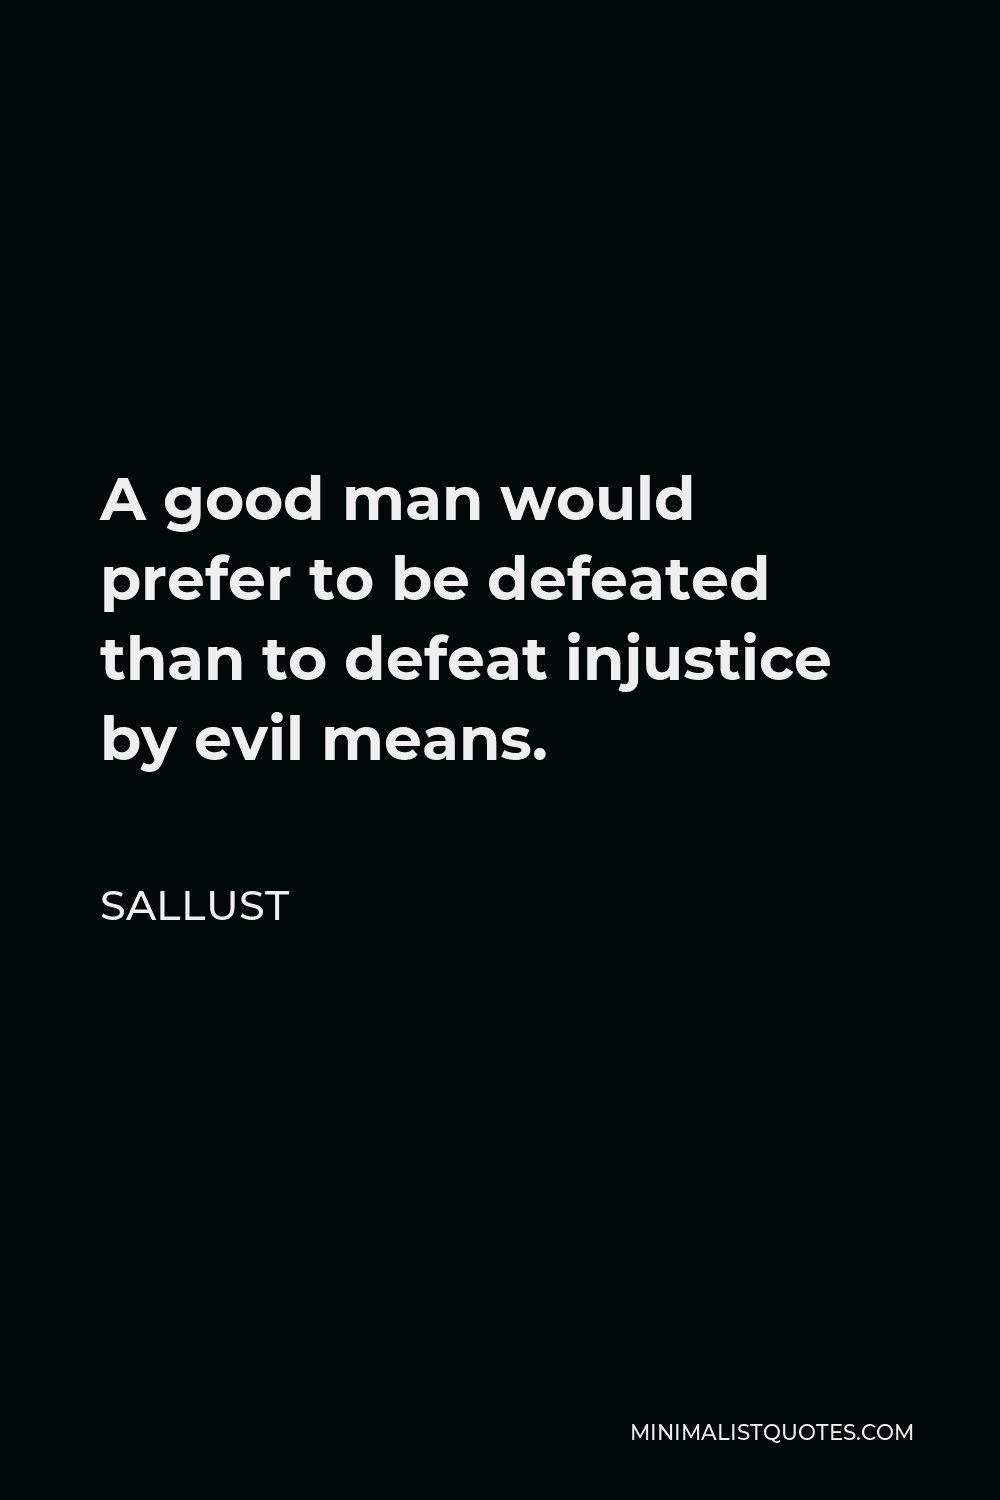 Sallust Quote - A good man would prefer to be defeated than to defeat injustice by evil means.